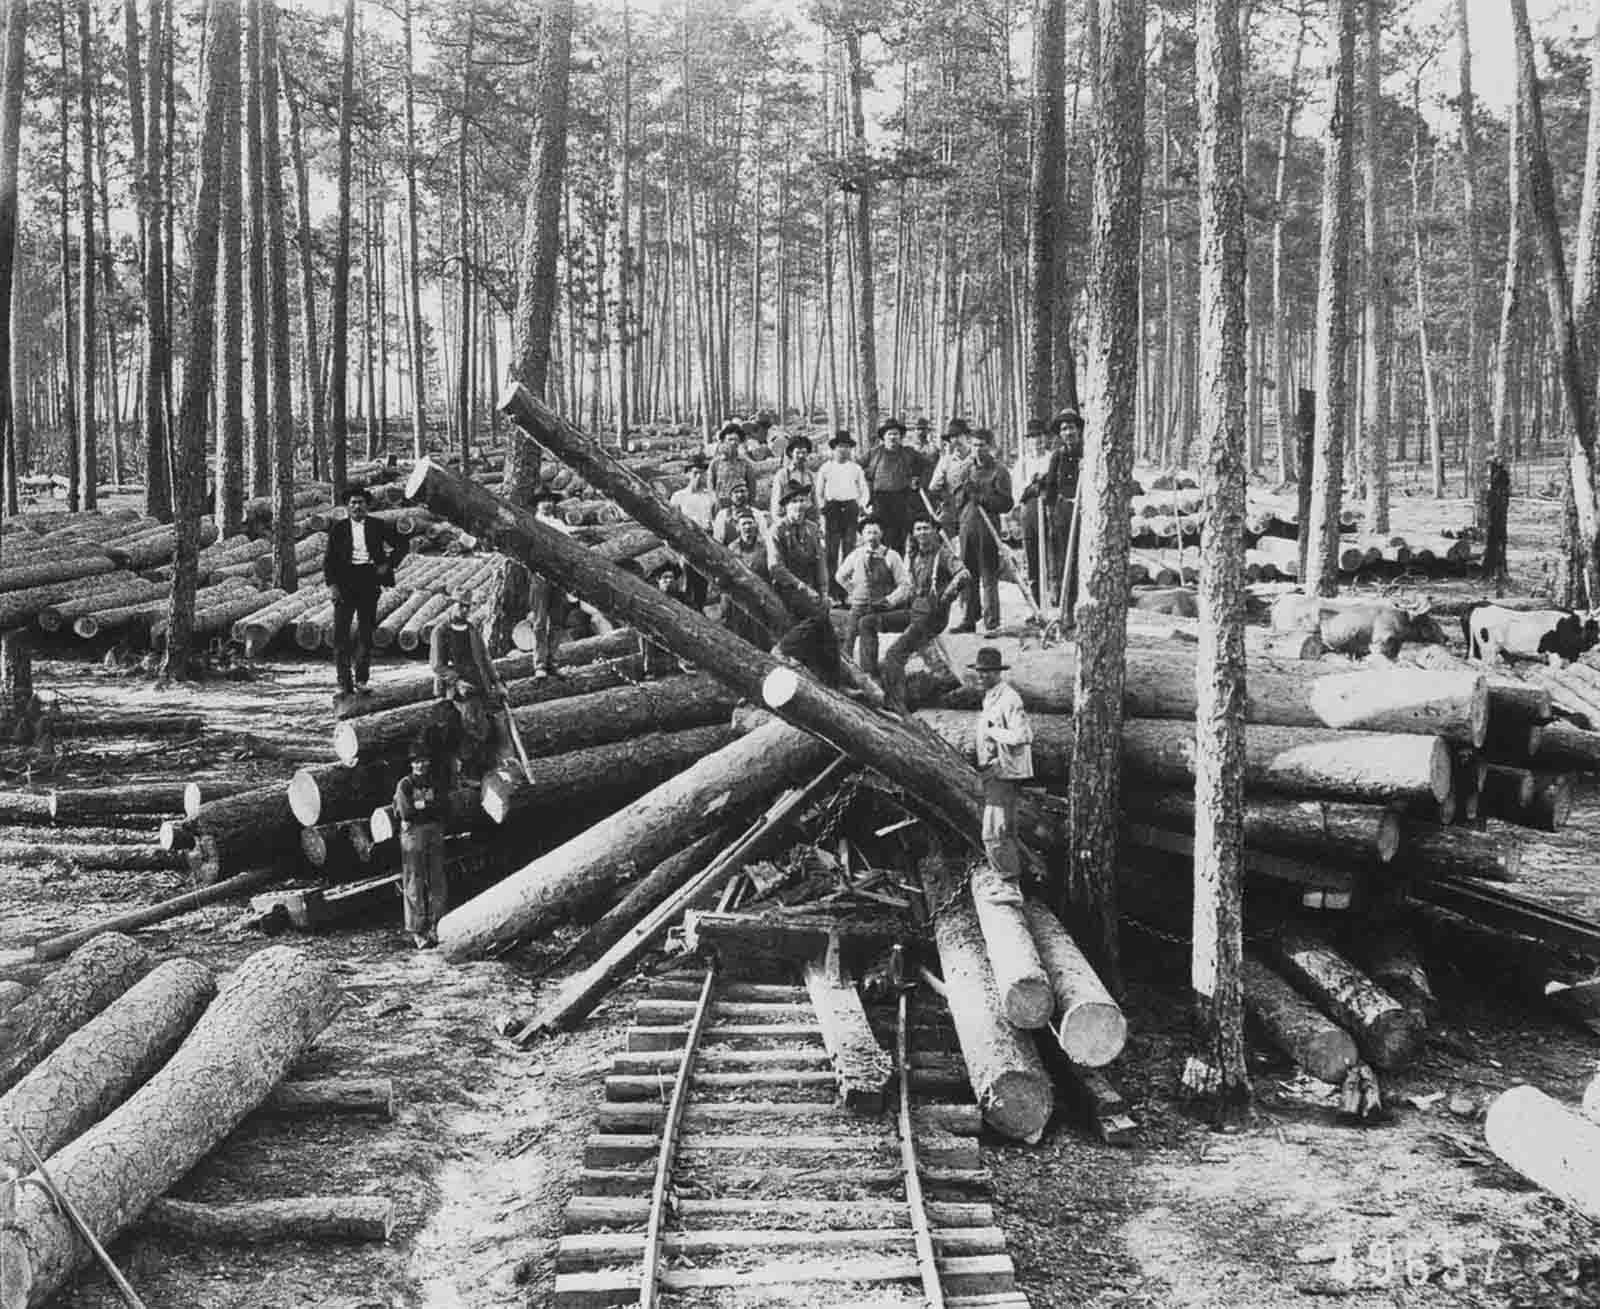 A logging crew stands among cut old growth longleaf pine in Vernon Parish, Louisiana, 1904.